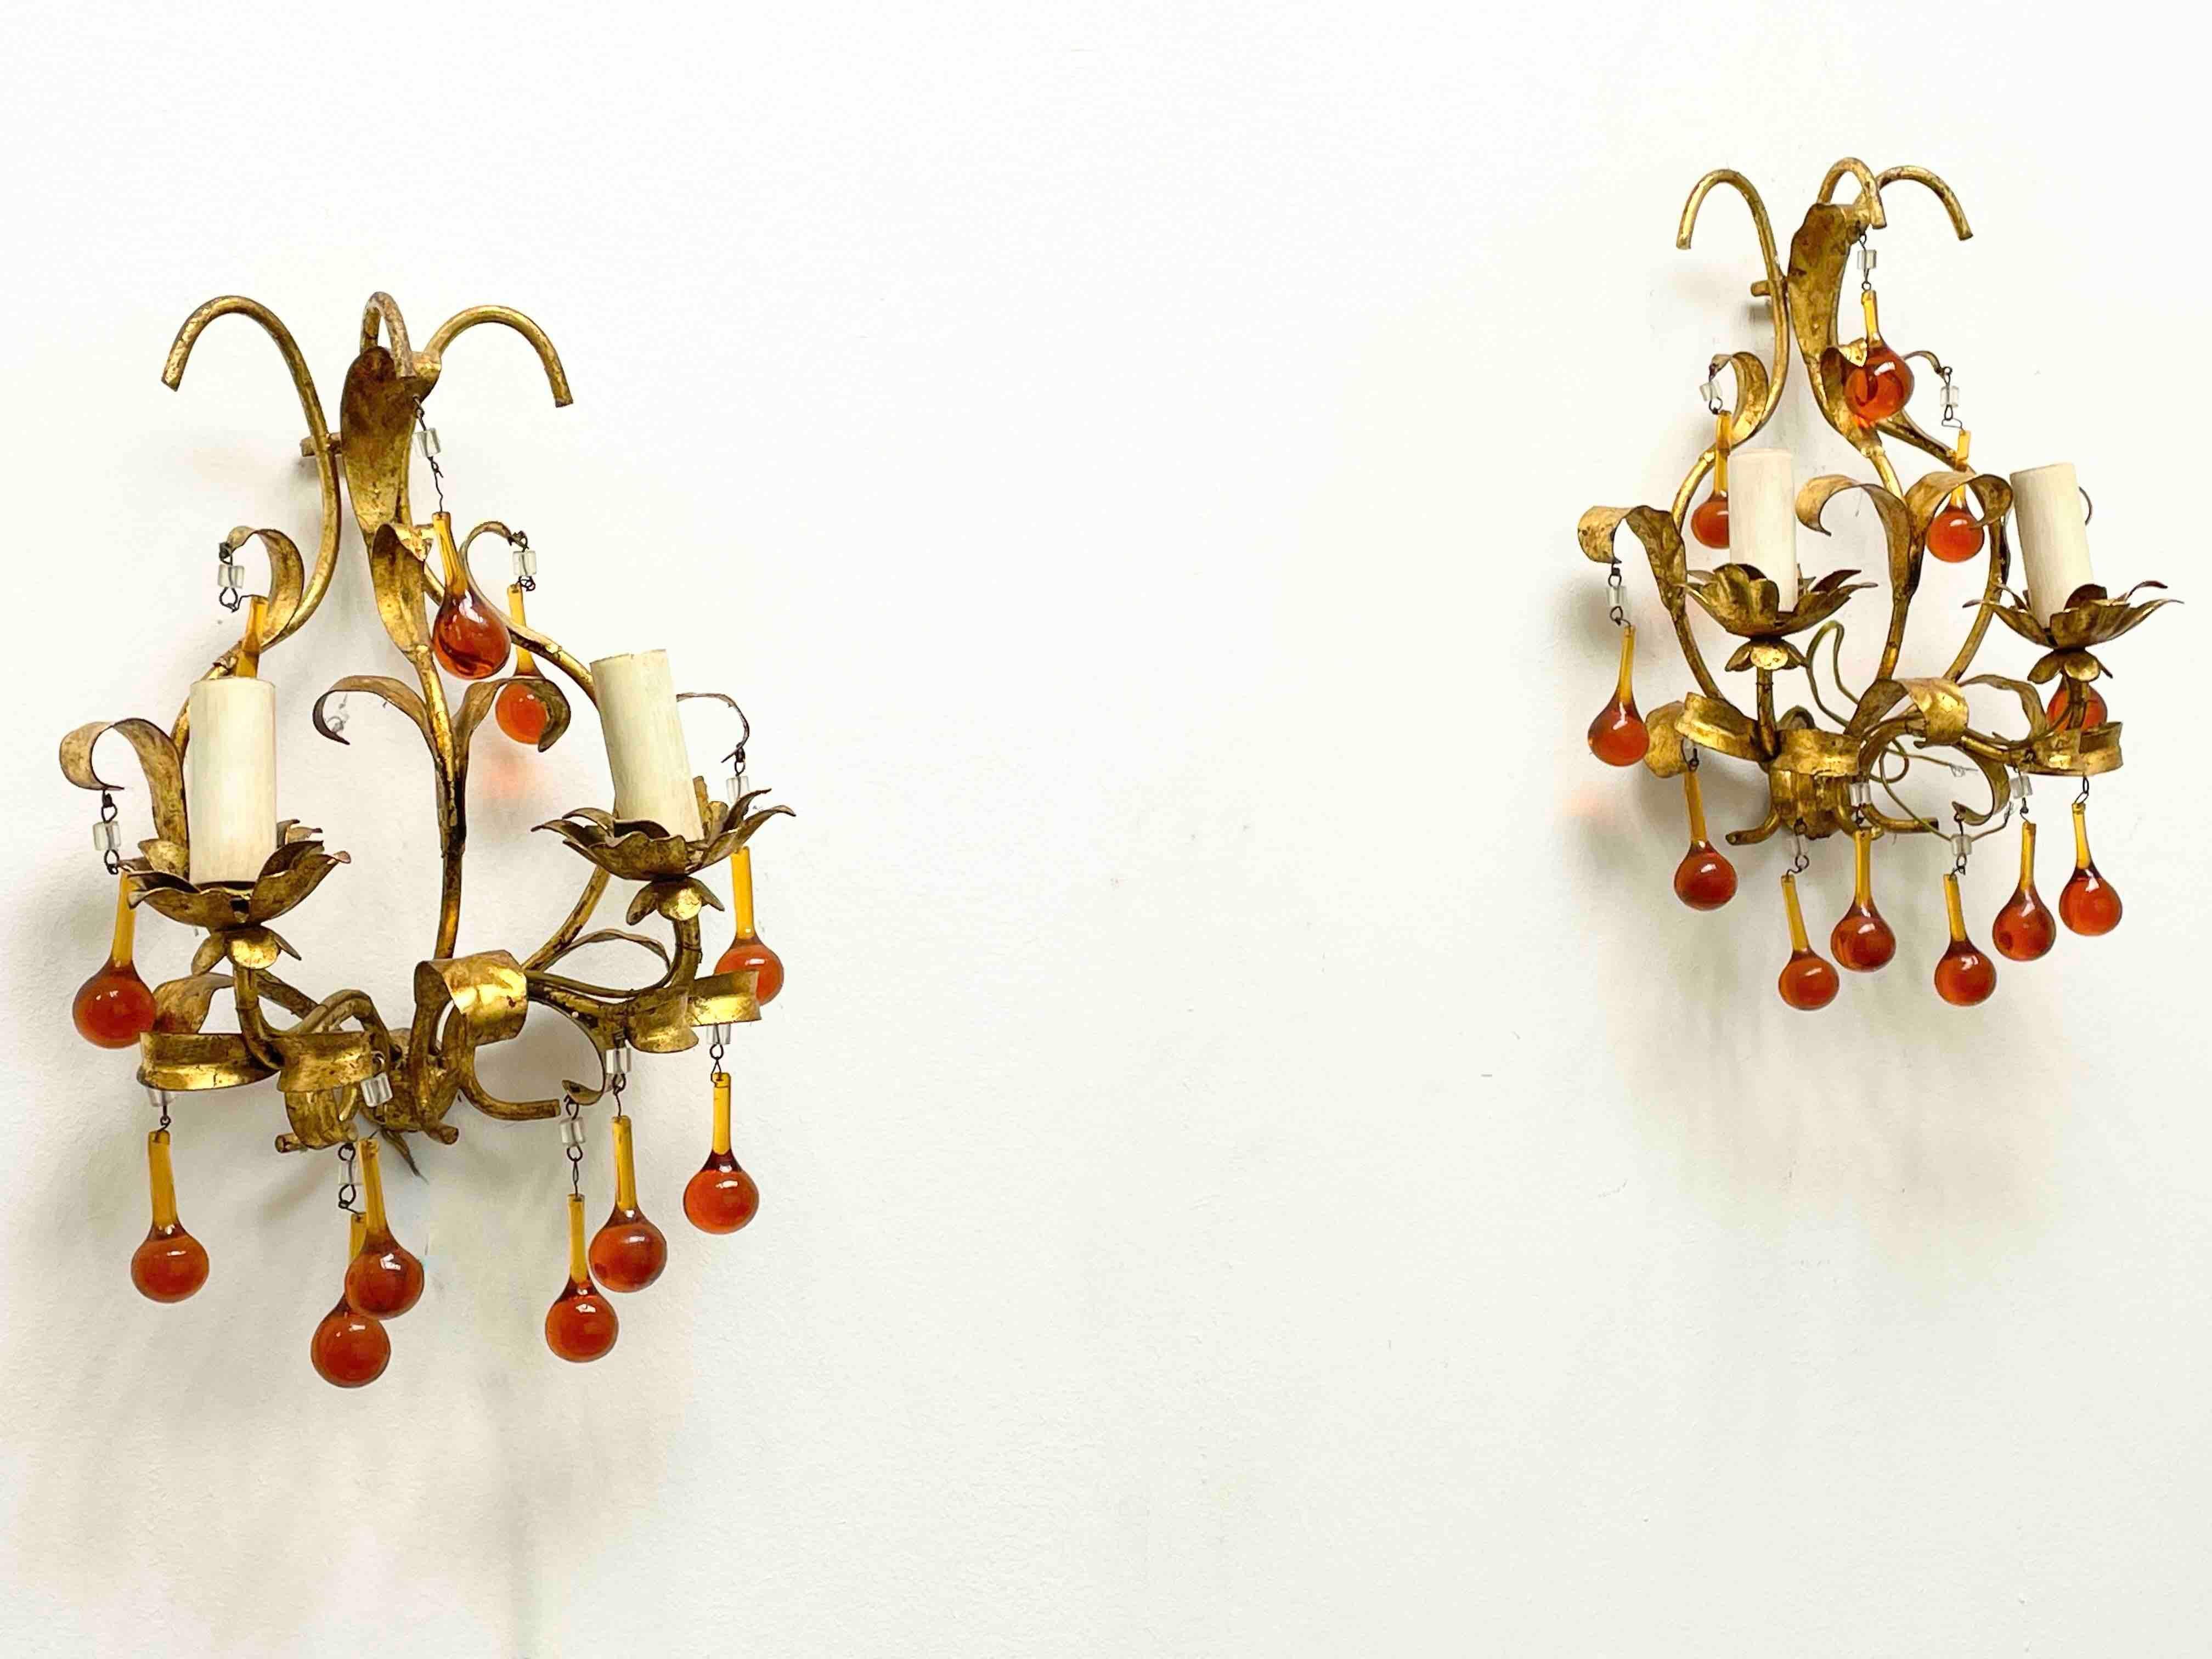 Pair of Tole Sconces with Glass Drops Gilded Metal, Italy, 1960s For Sale 1